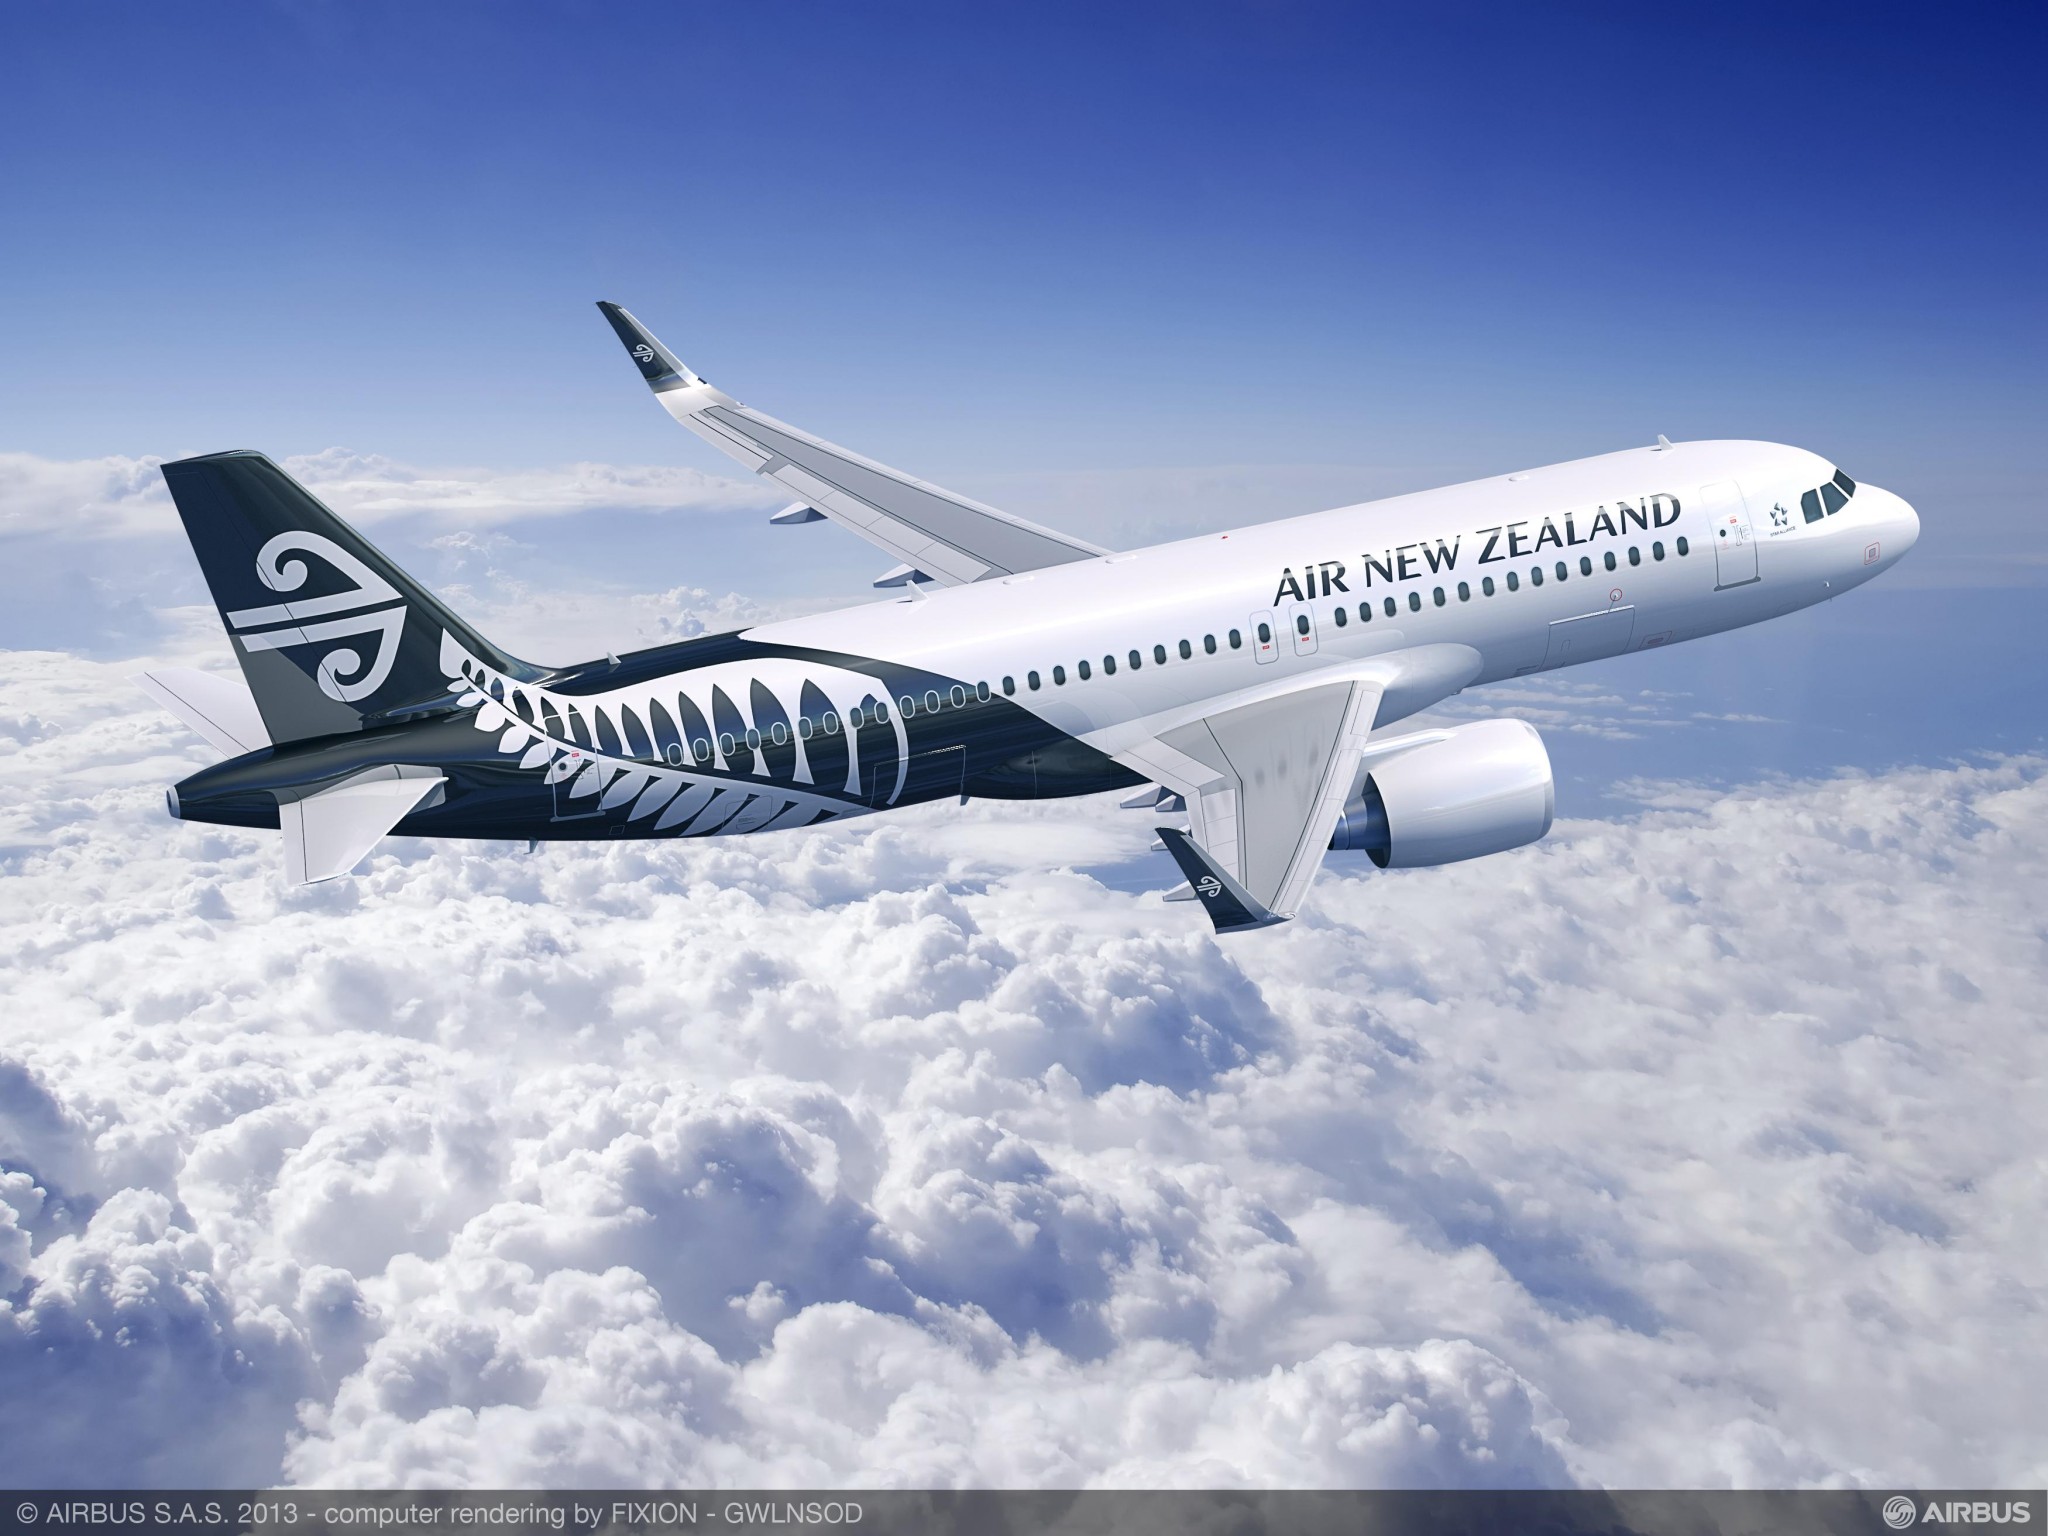 Air New Zealand anticipates 2.8 million passengers during the holidays